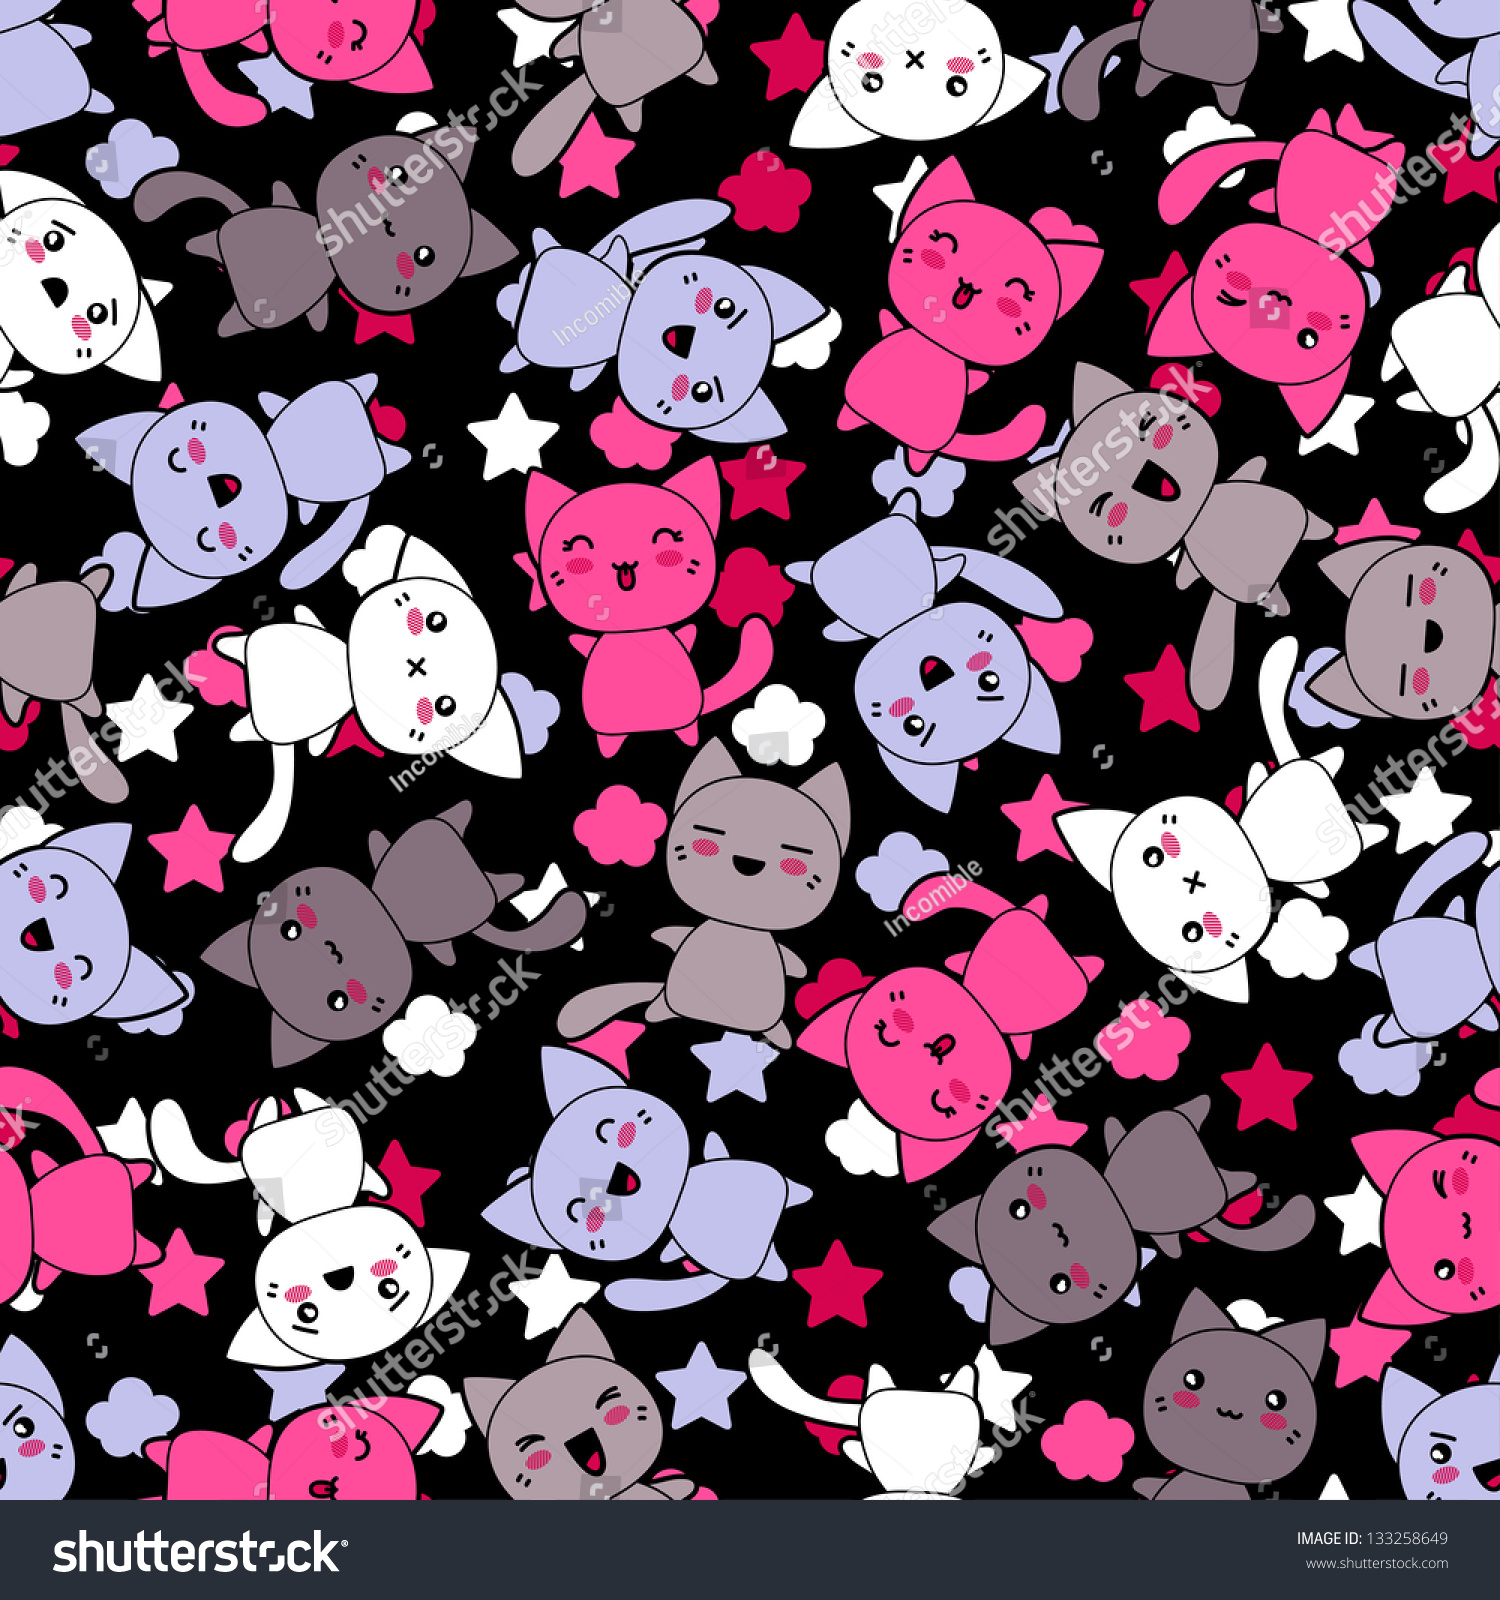 Seamless Pattern With Cute Kawaii Doodle Cats. Stock Vector ...